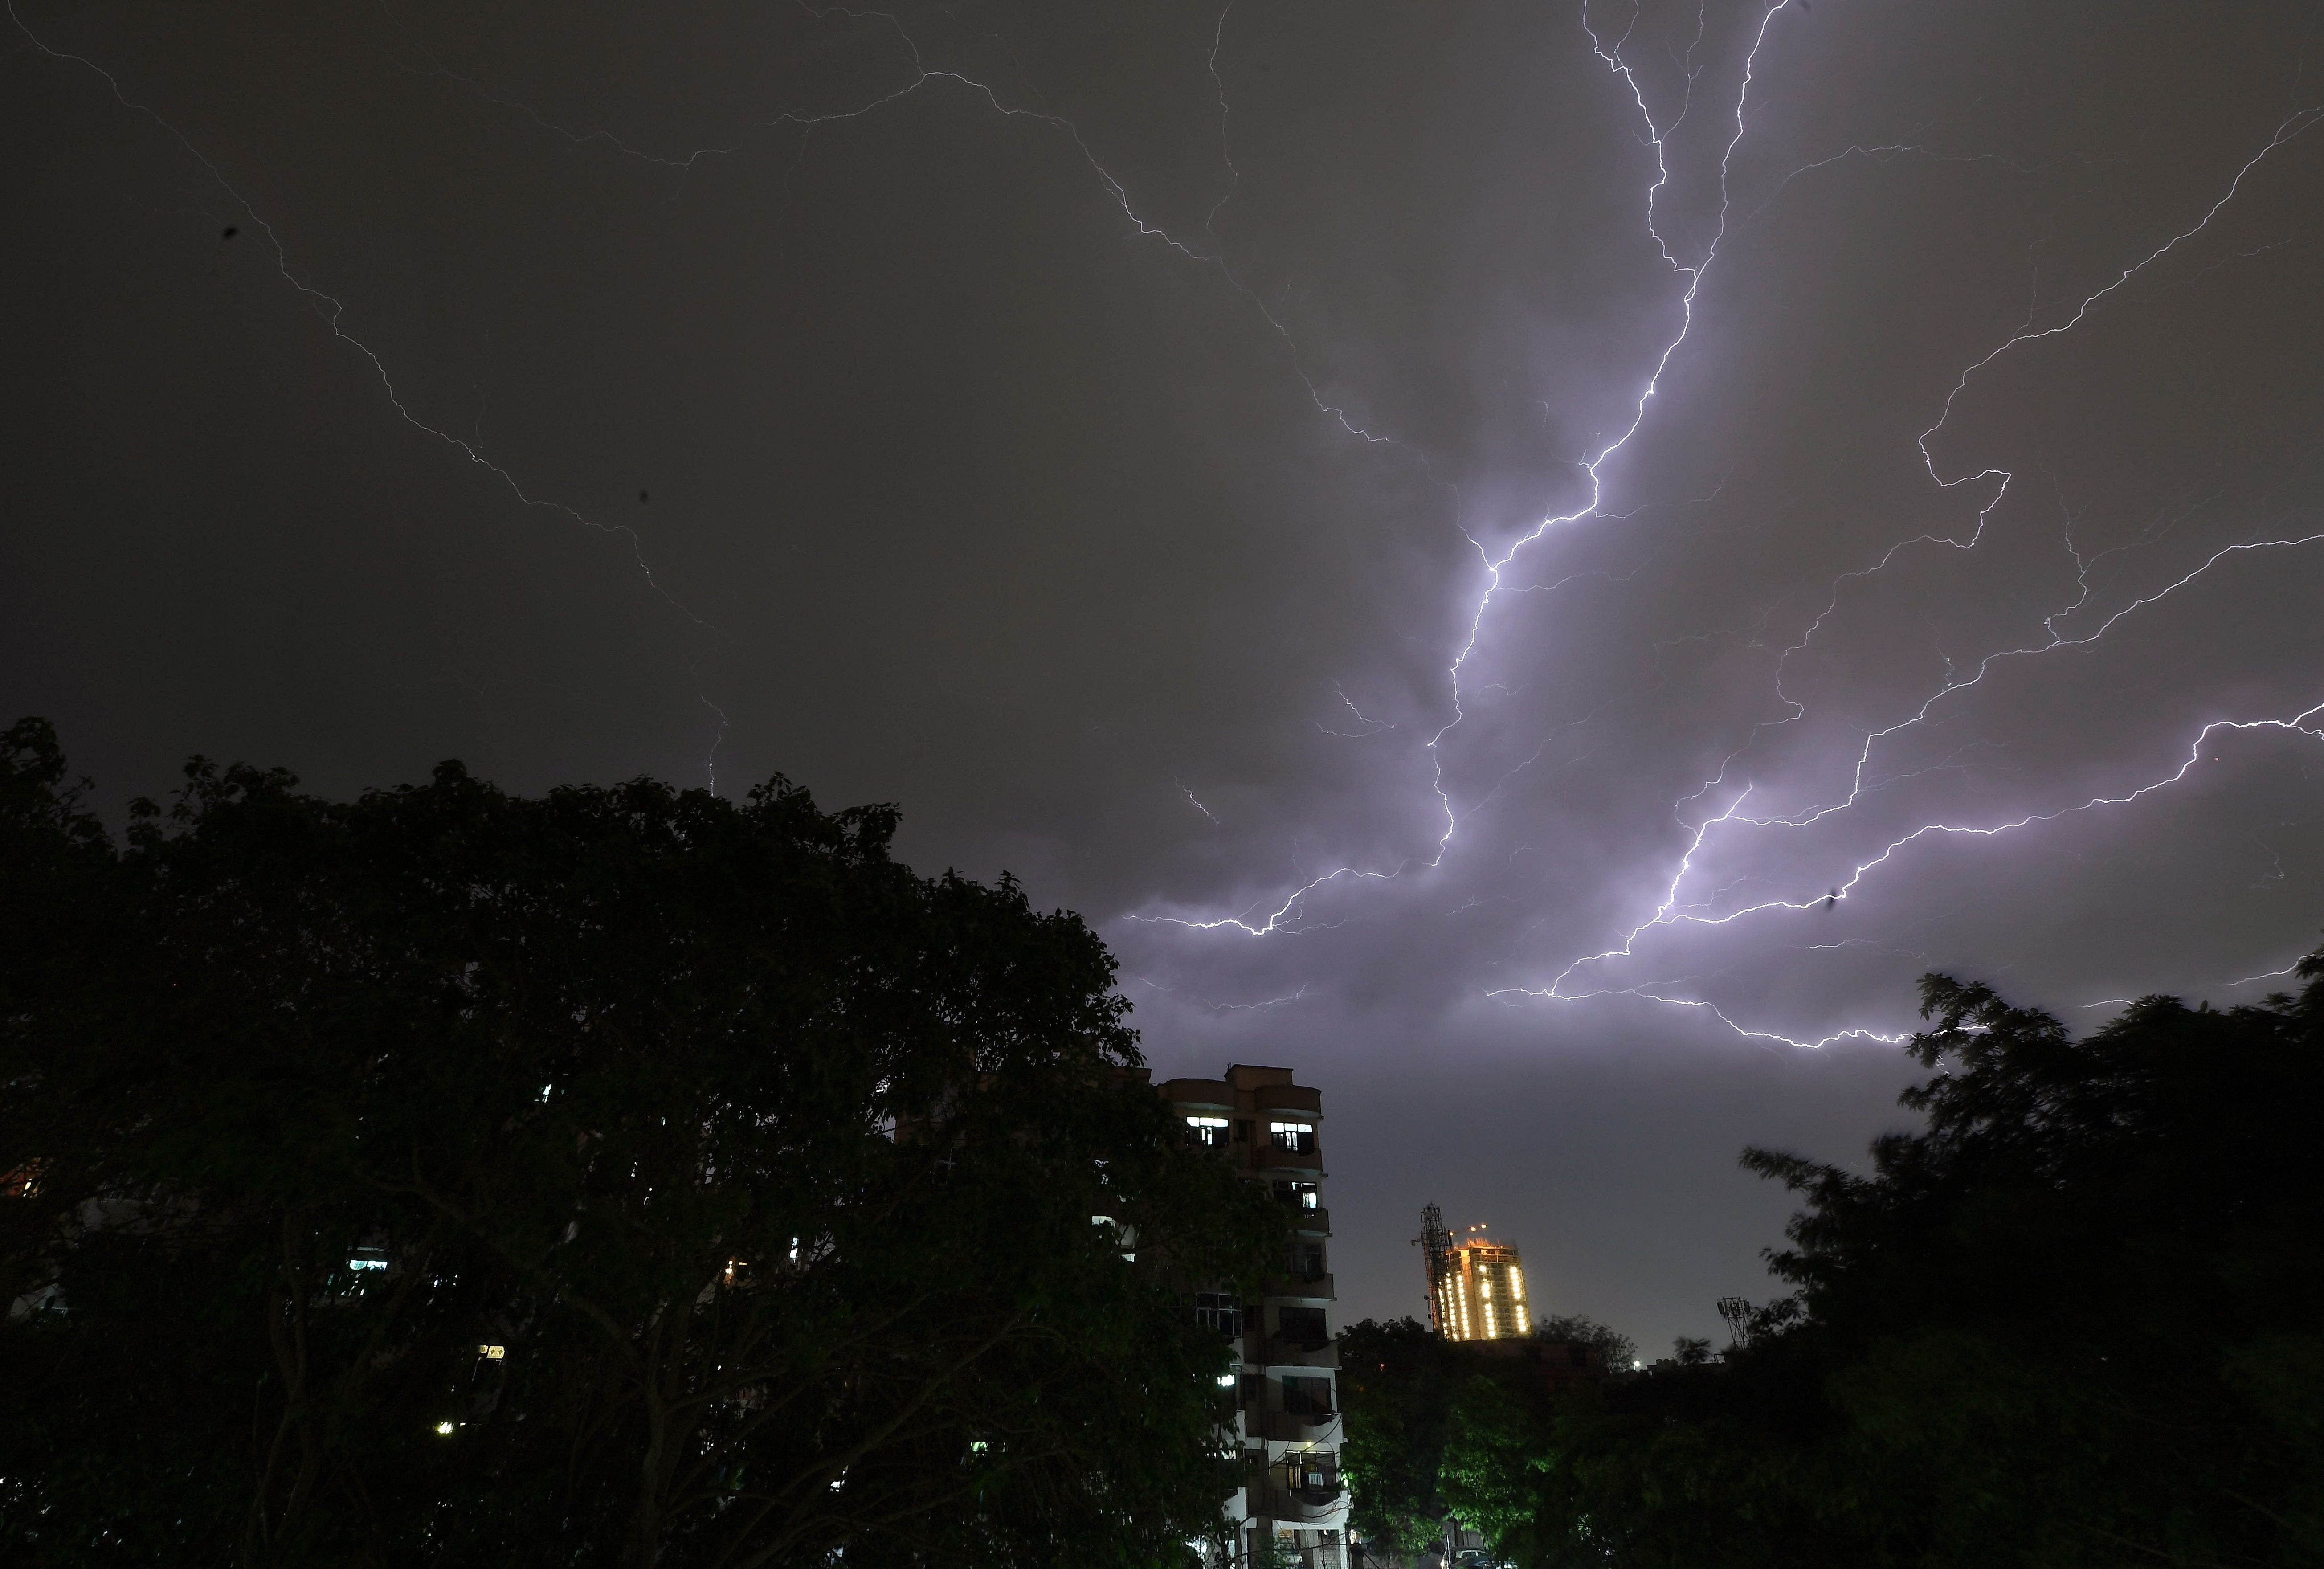 File image: Lightning kills thousands of people in India every year as the region is more vulnerable